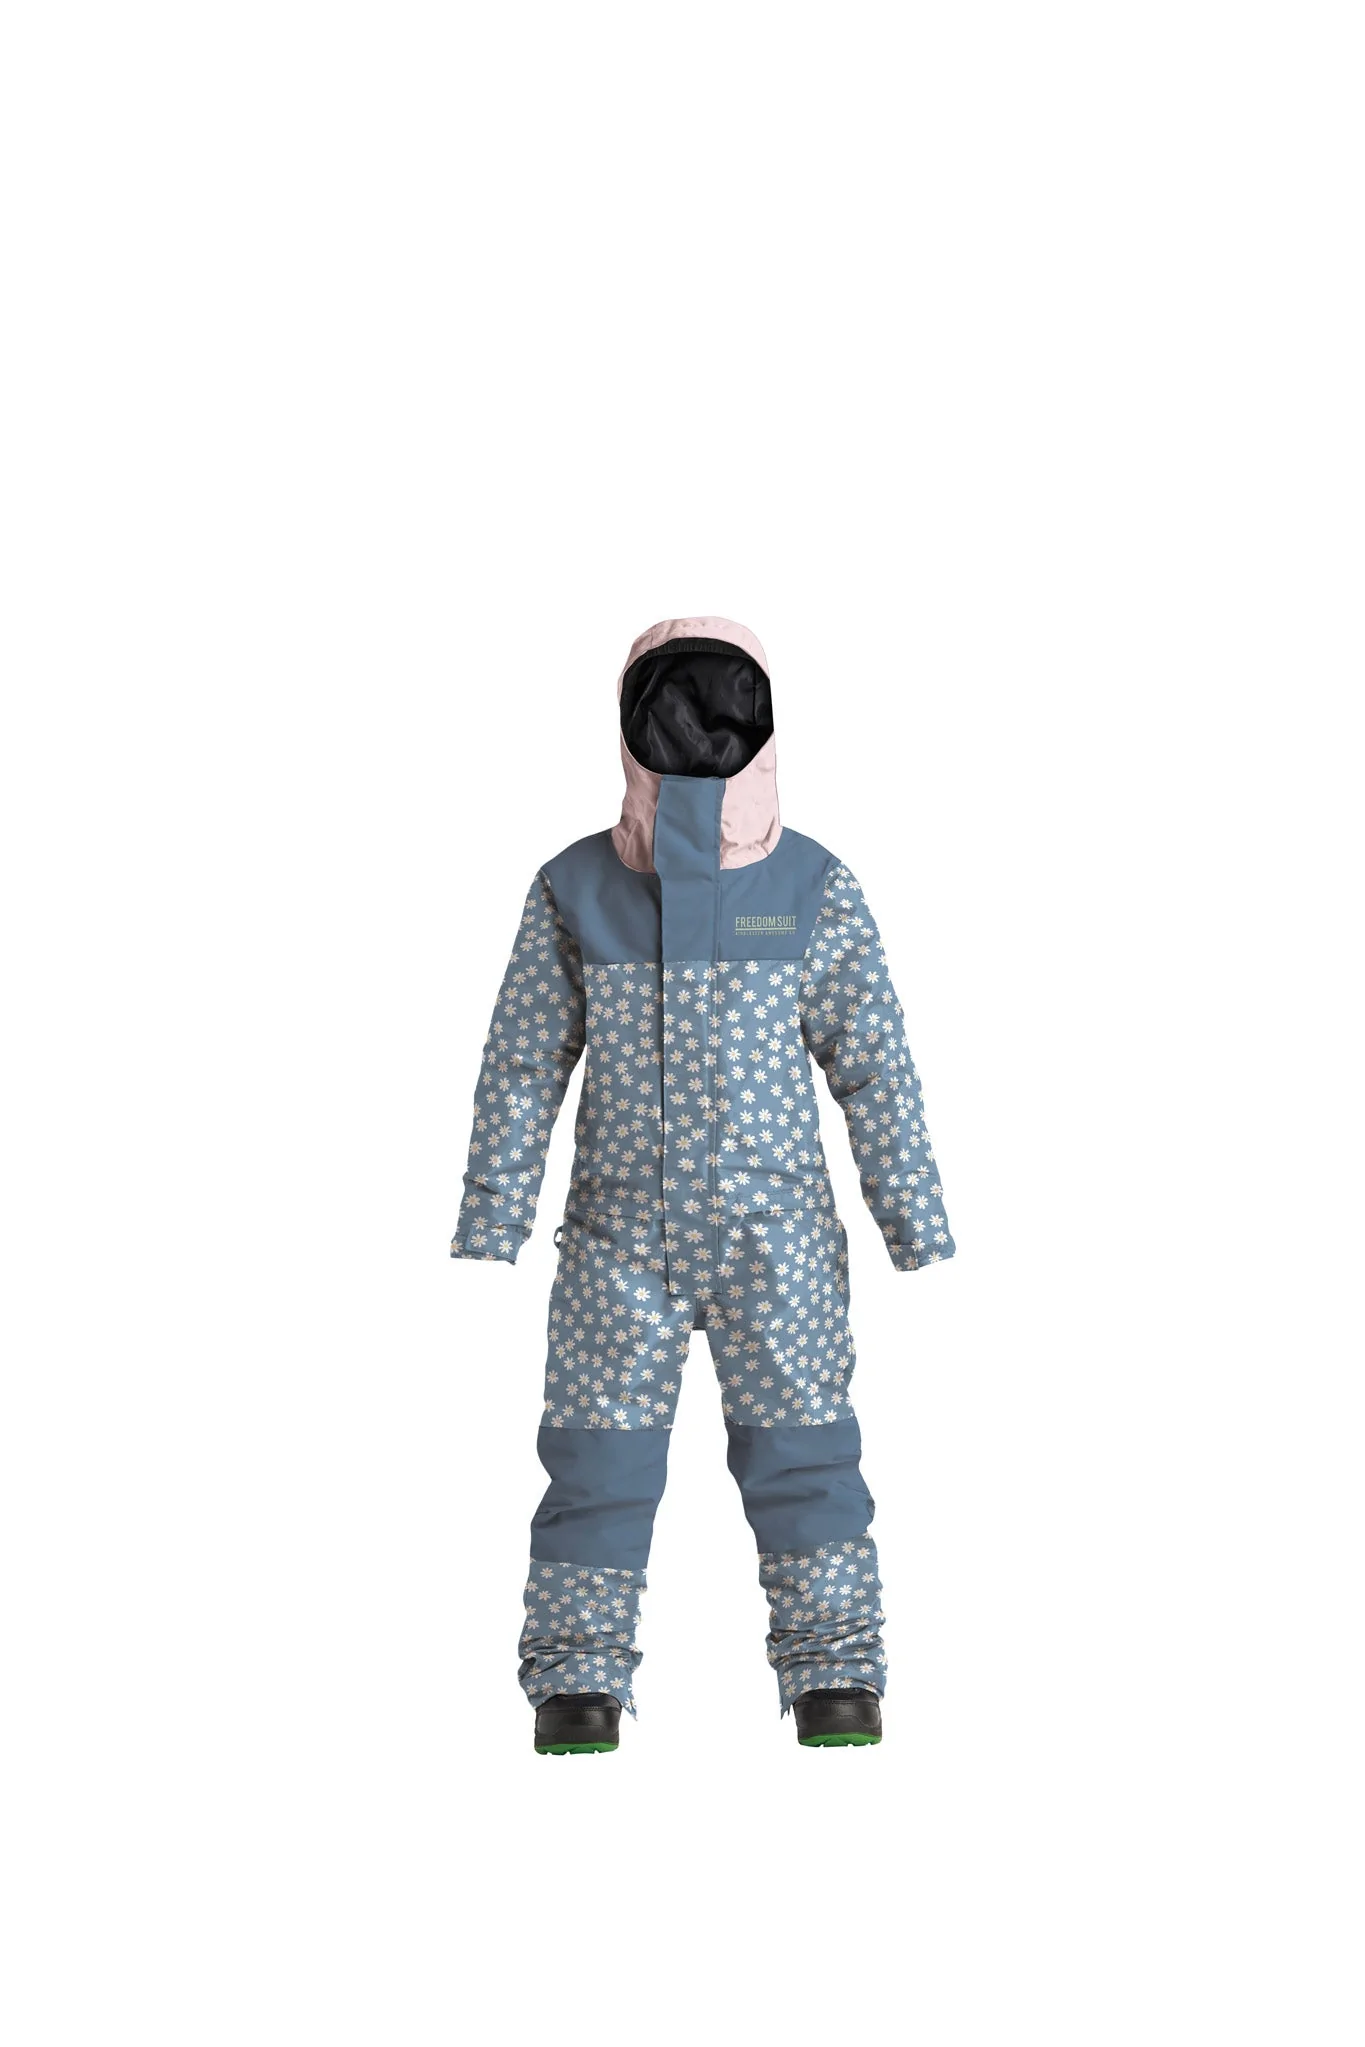 Airblaster Youth Freedom Suit light blue daisy